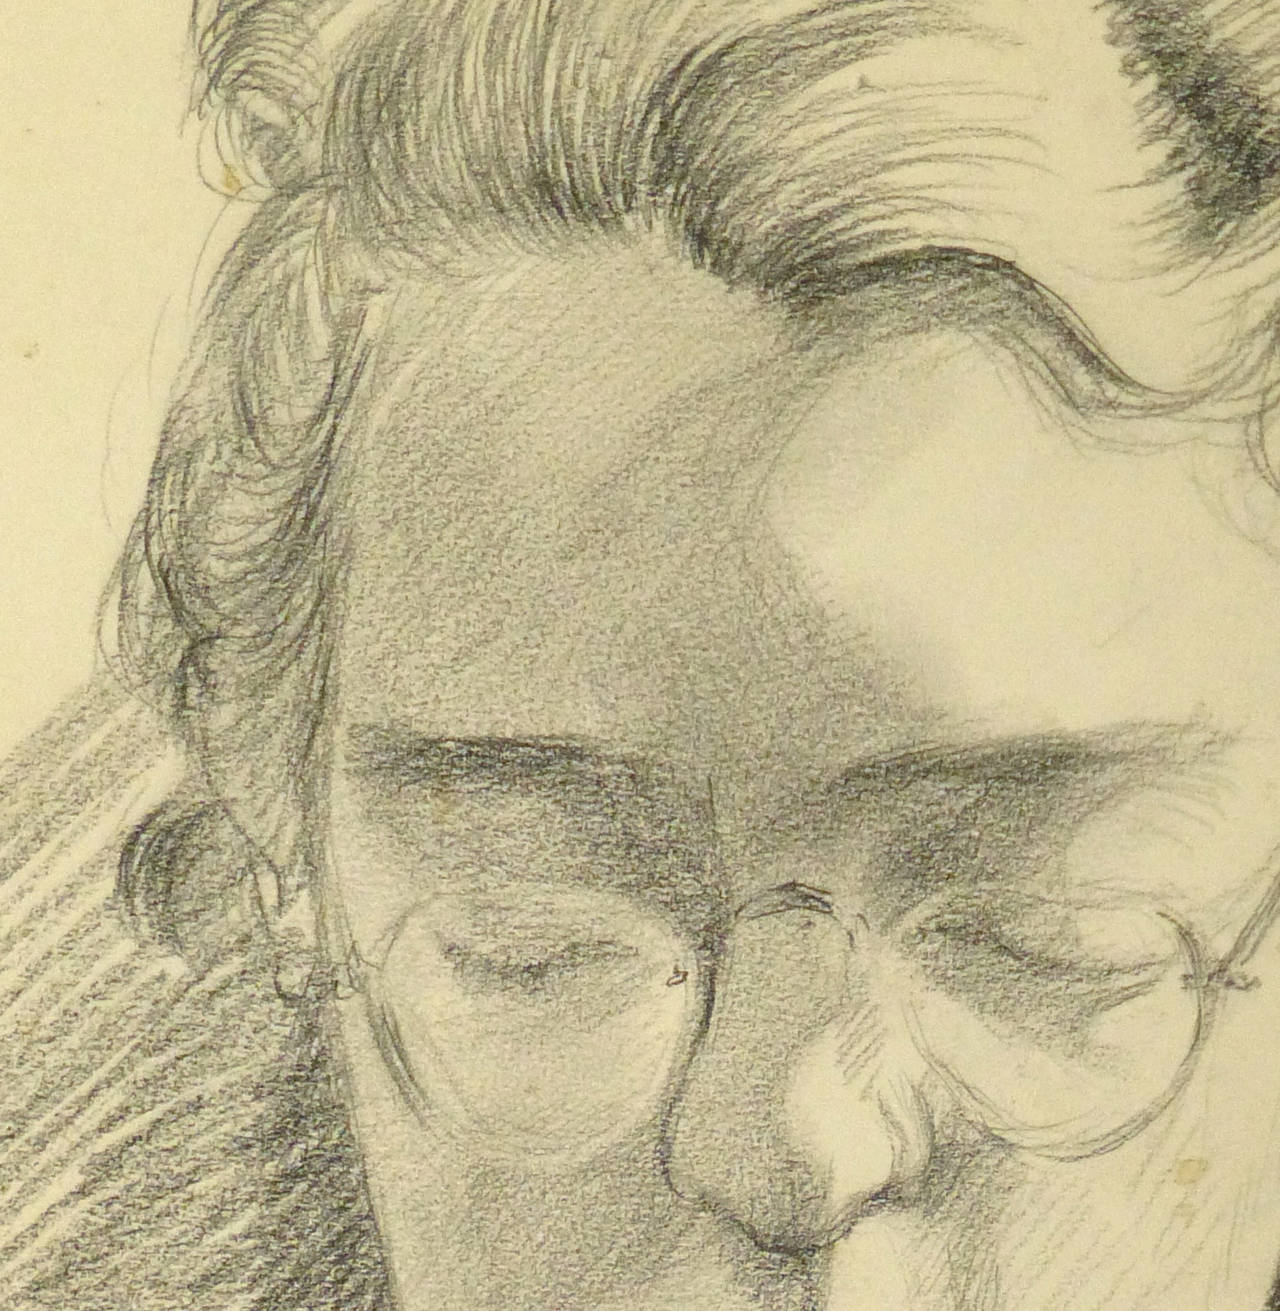 Vintage Pencil Drawing of Woman - Art by W. Langer